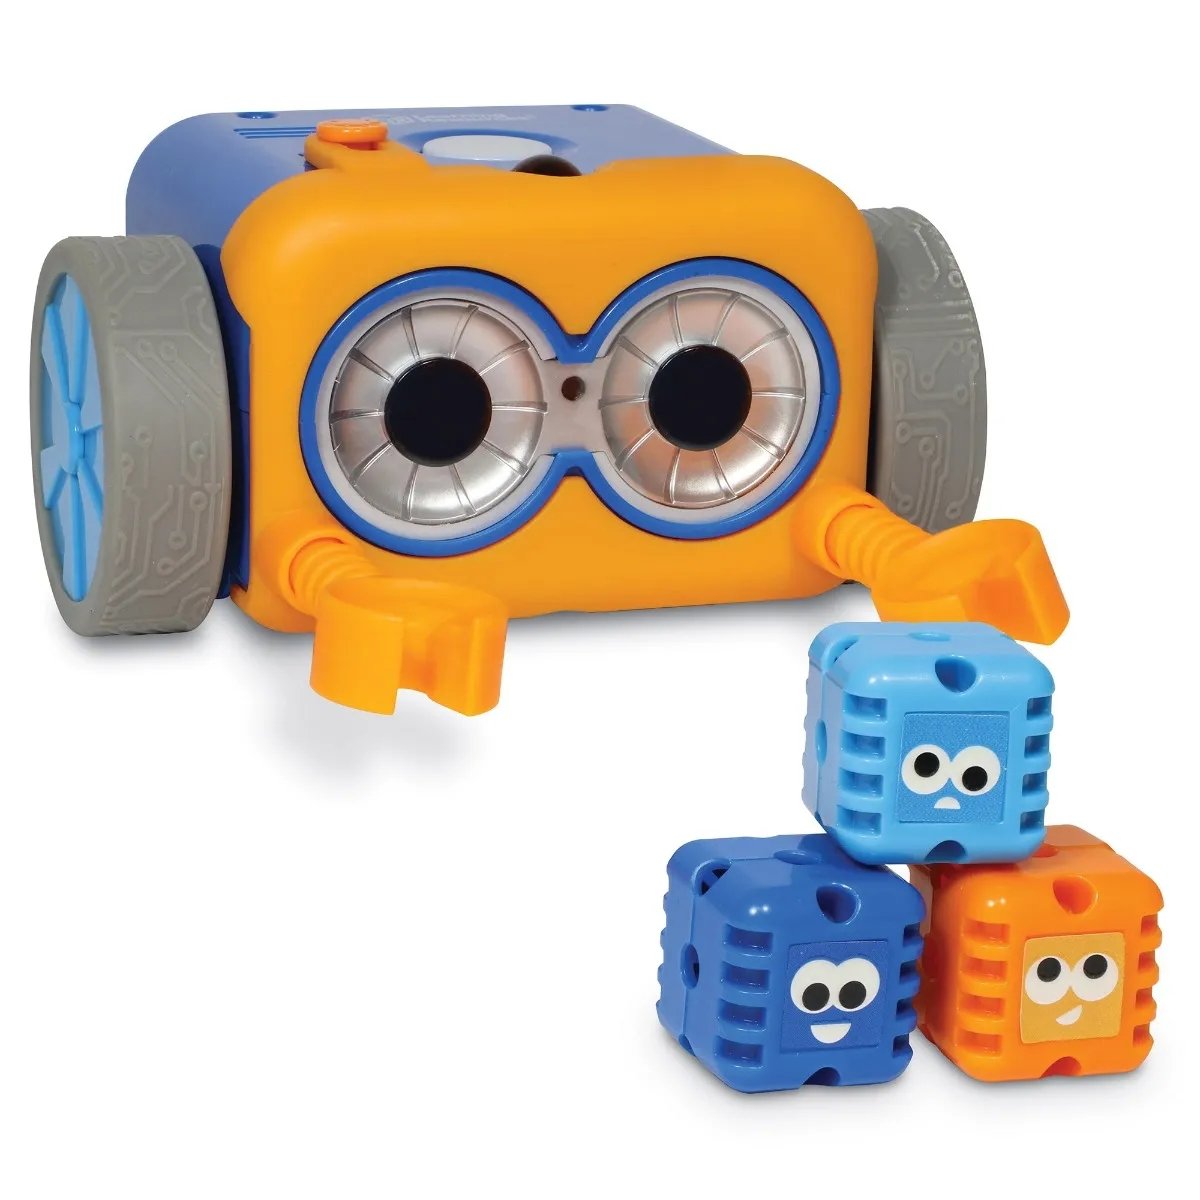 Botley The Coding Robot Activity Set Review 